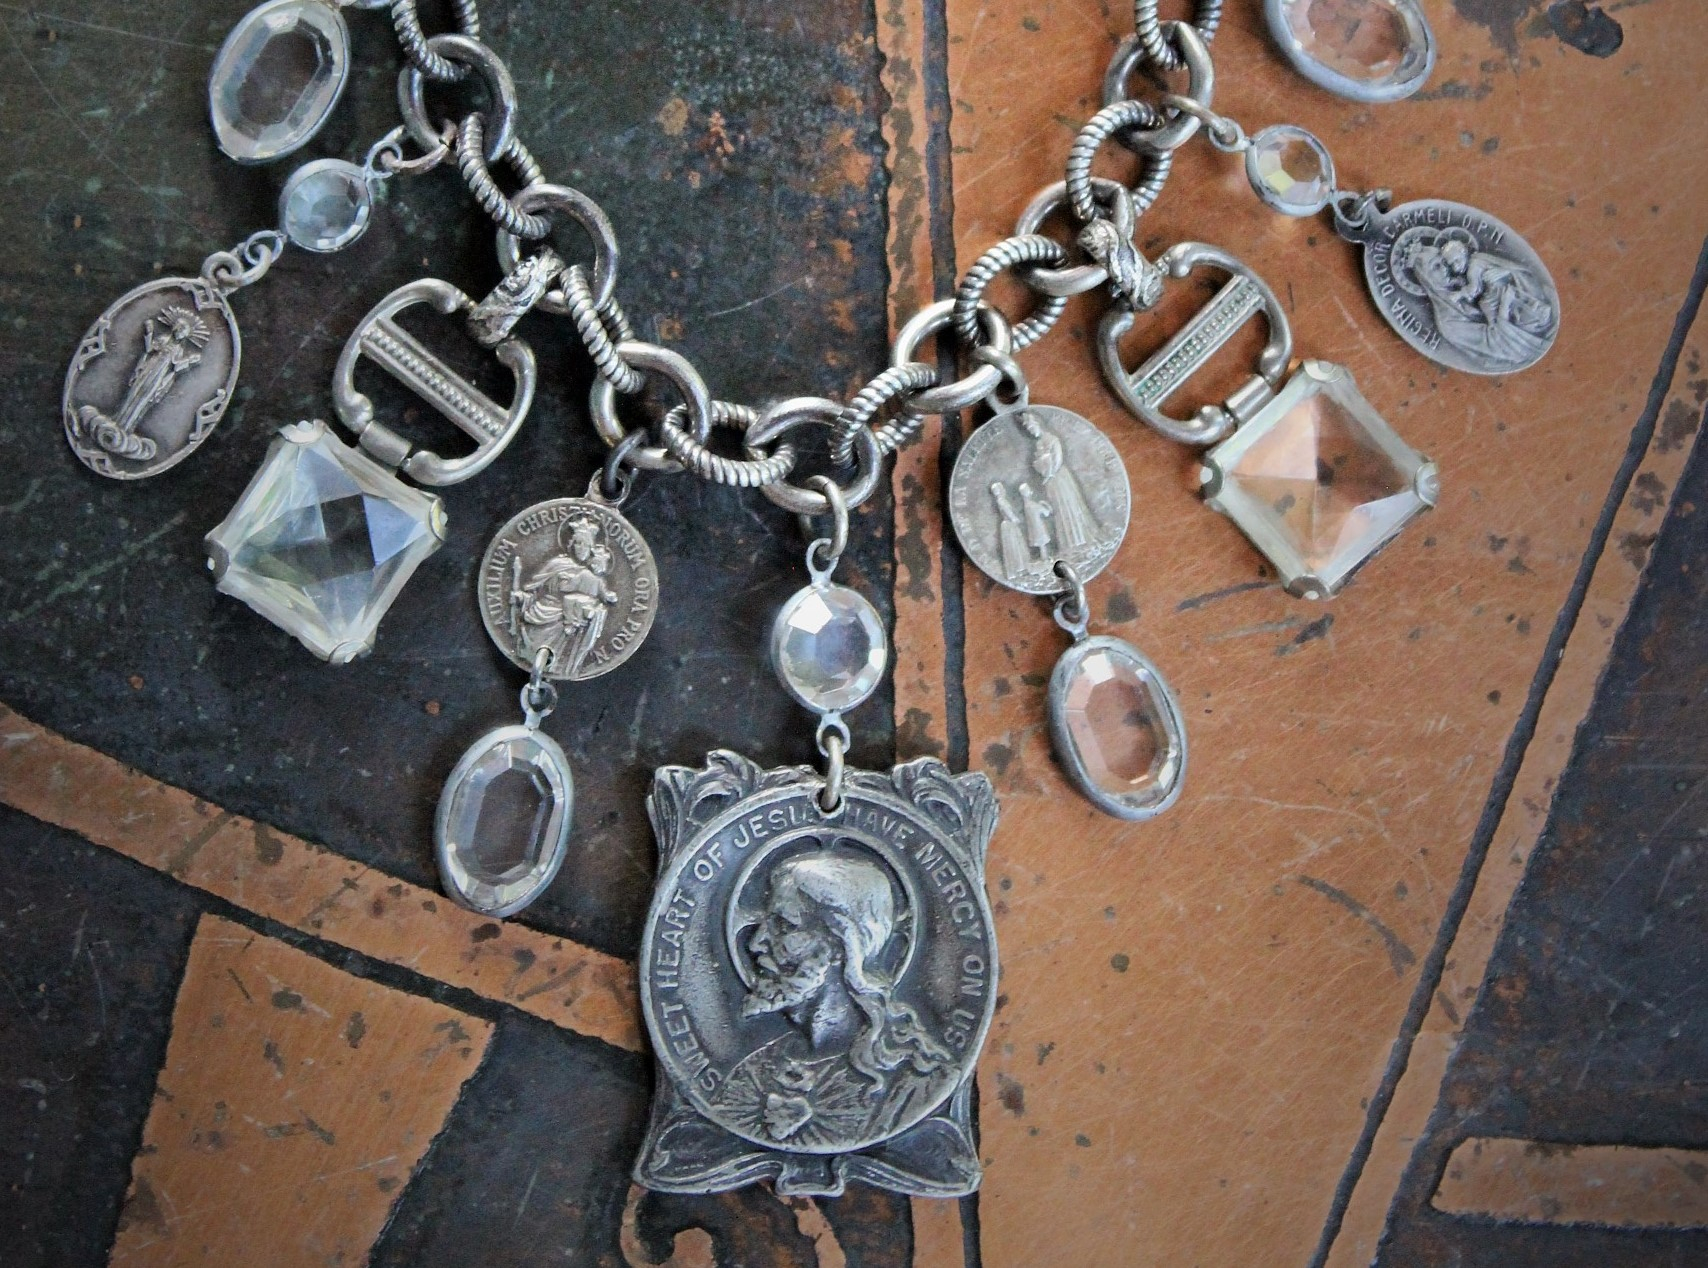 NEW! My Heart is a Place of Prayer Bracelet with Sterling Chain,Rare Antique Sacred Heart of Jesus Medal,Antique French Medals & More!